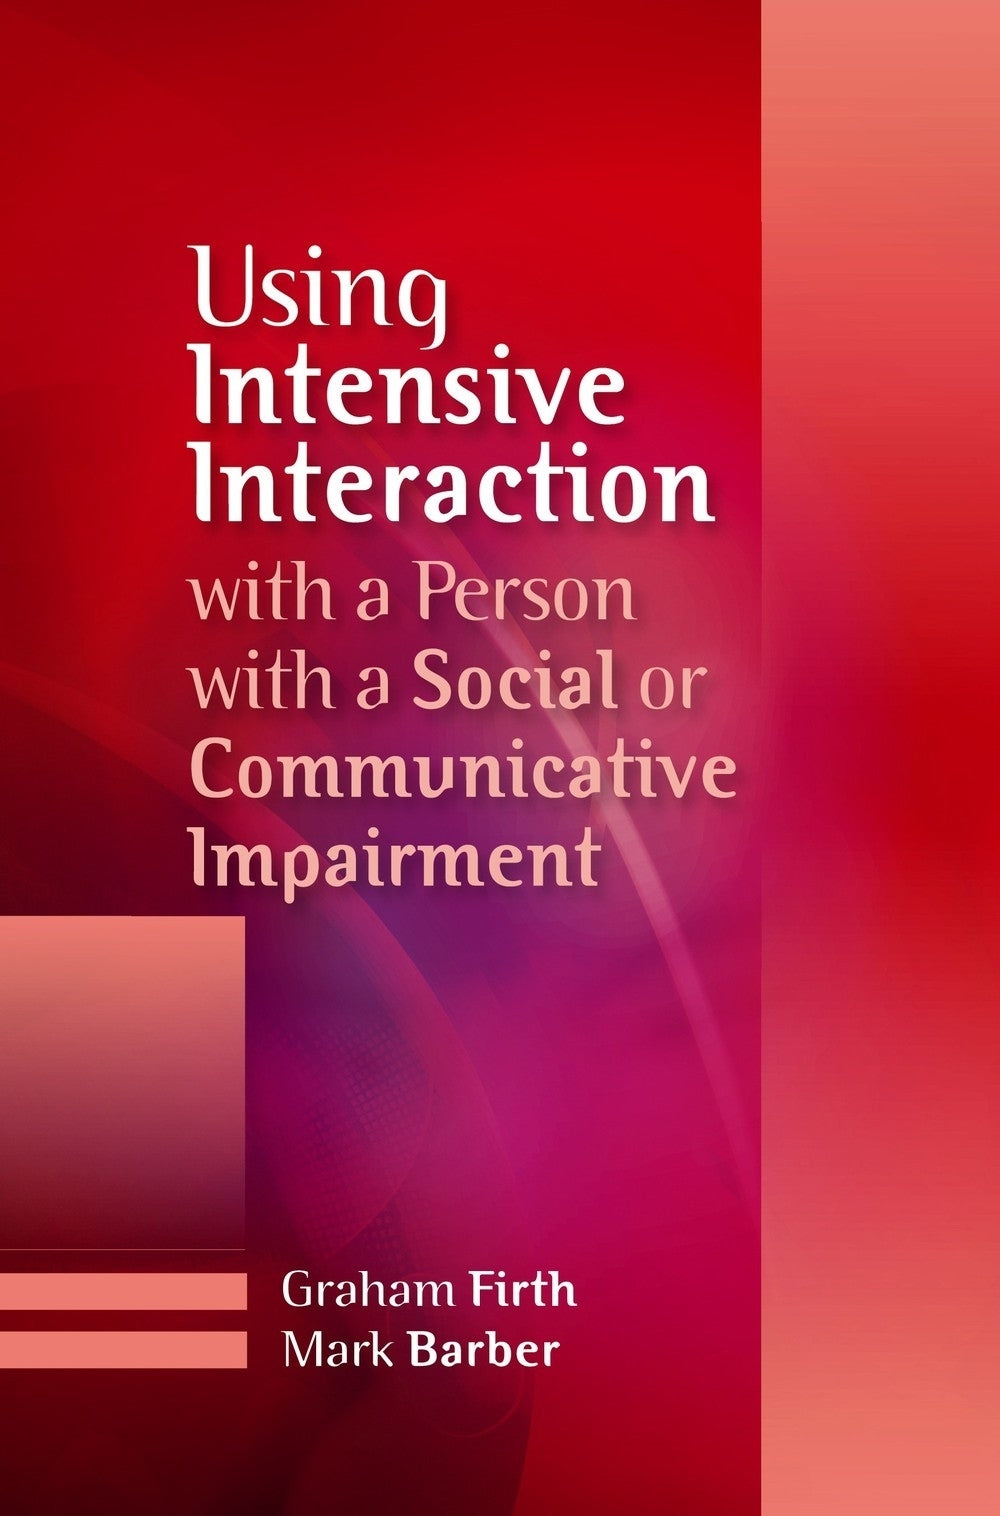 Using Intensive Interaction with a Person with a Social or Communicative Impairment by Mark Barber, Graham Firth